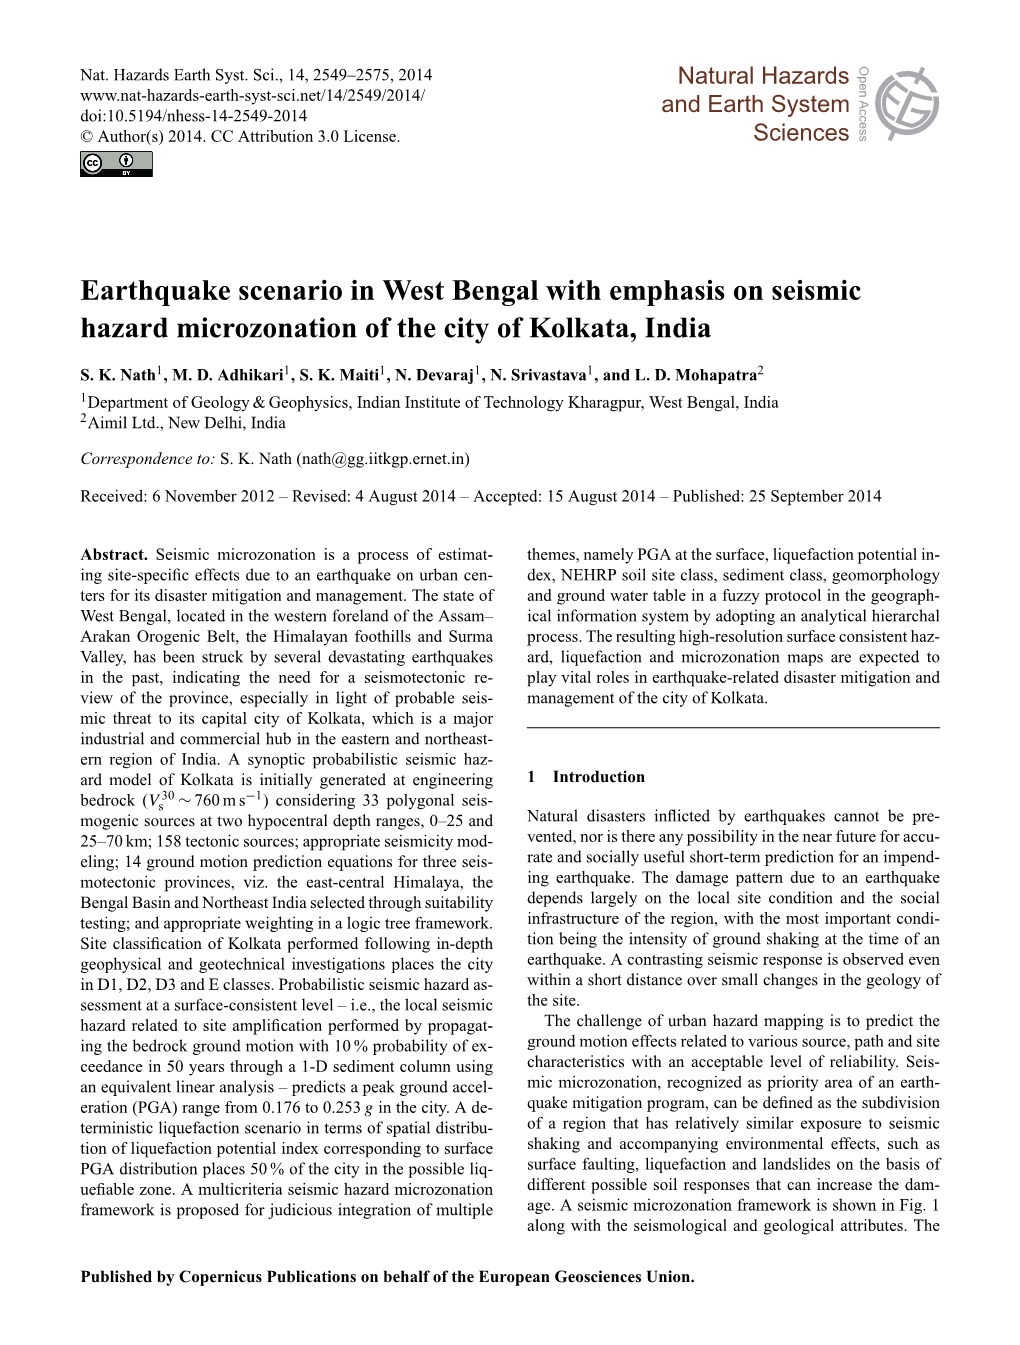 Earthquake Scenario in West Bengal with Emphasis on Seismic Hazard Microzonation of the City of Kolkata, India